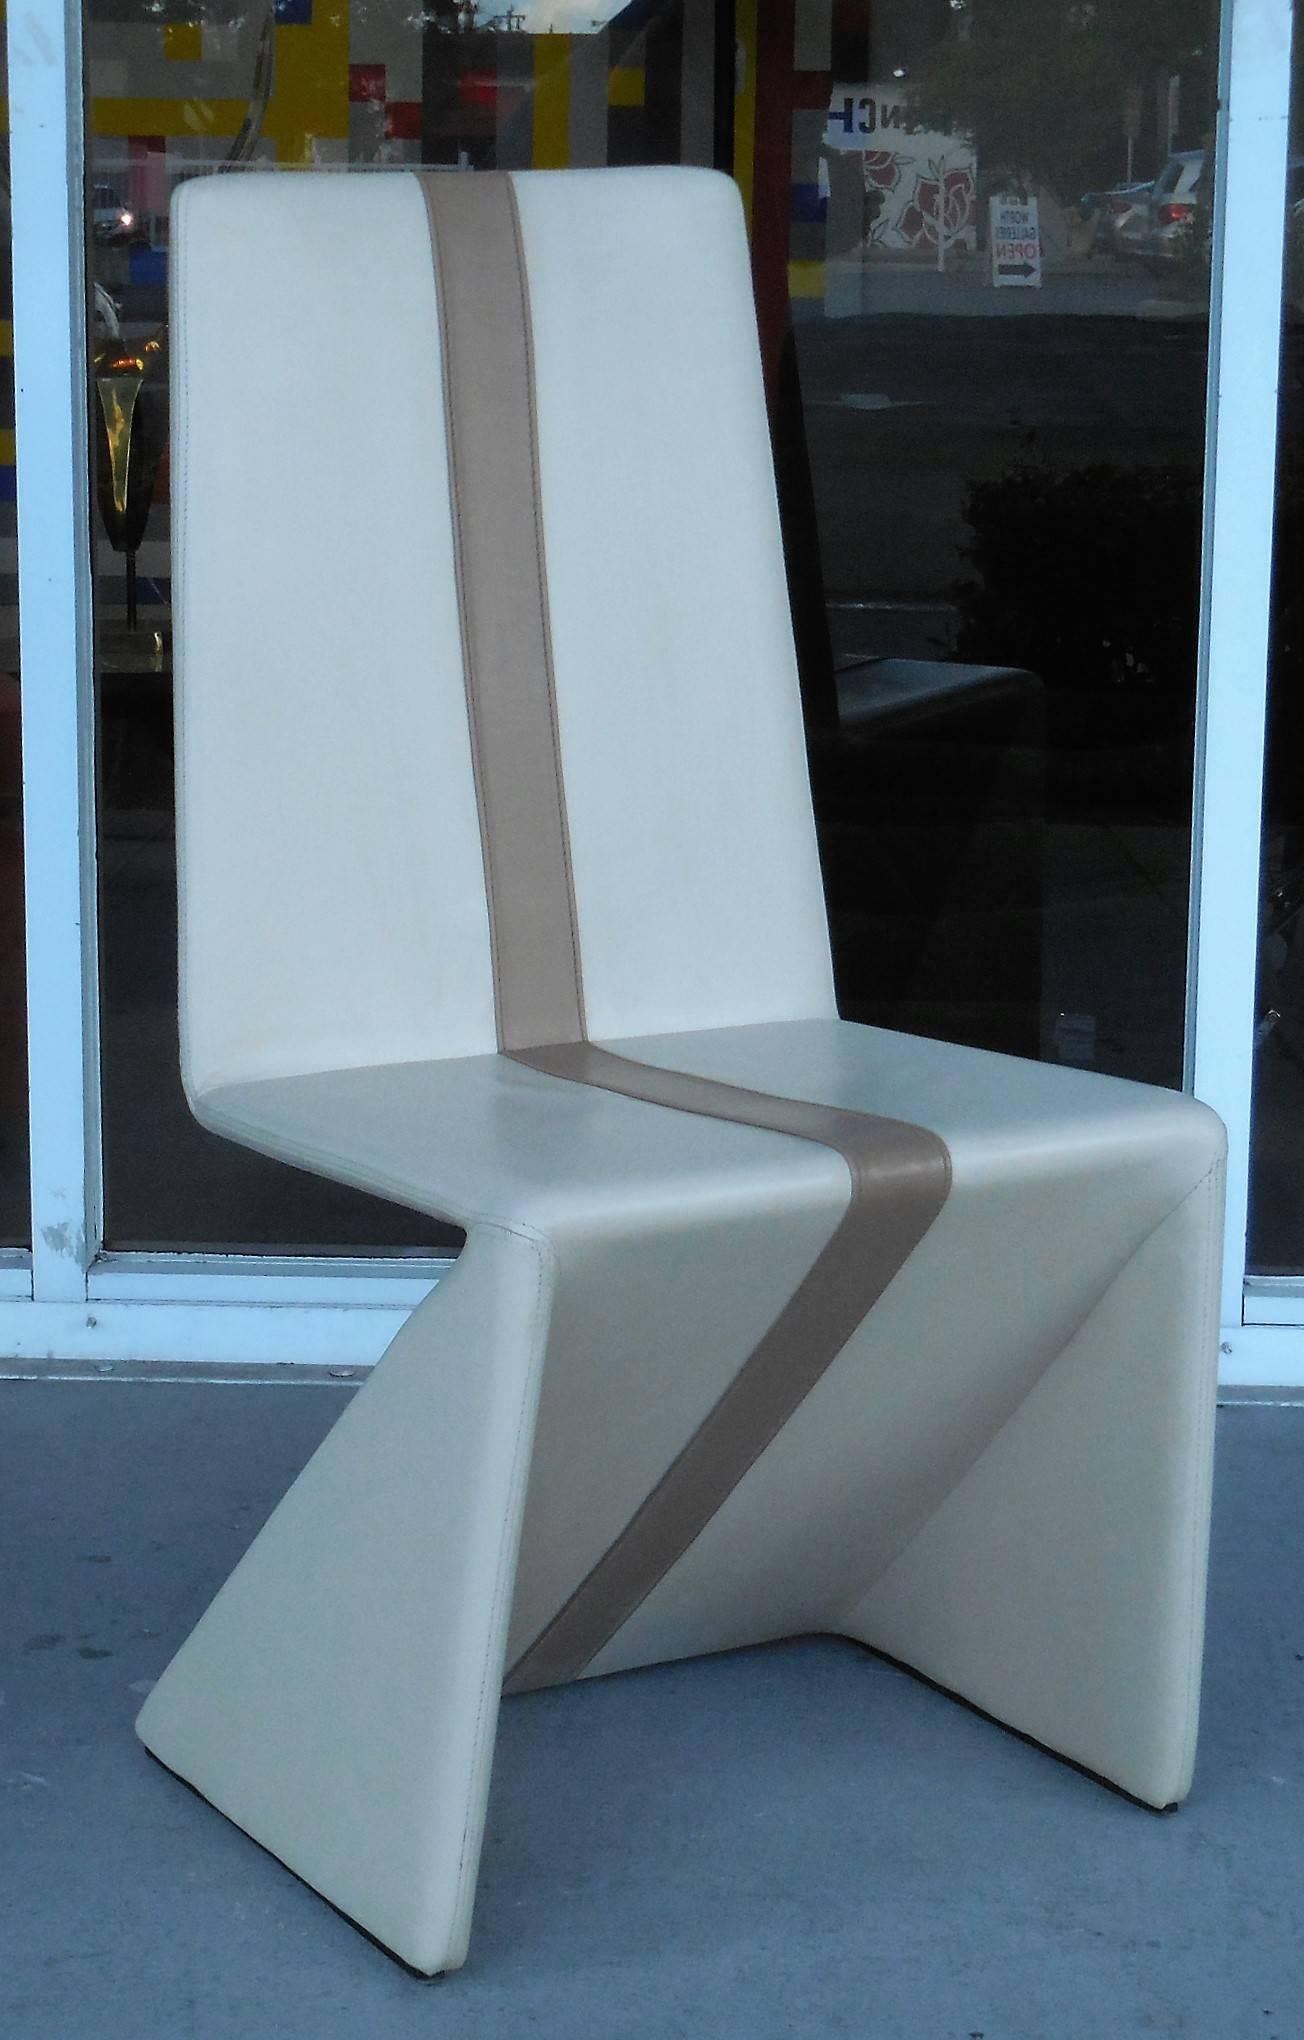 A set of 1970s dining chairs. Simple origami like design. Color is light taupe with a darker band running in the center. Attributed to Maison Jansen.